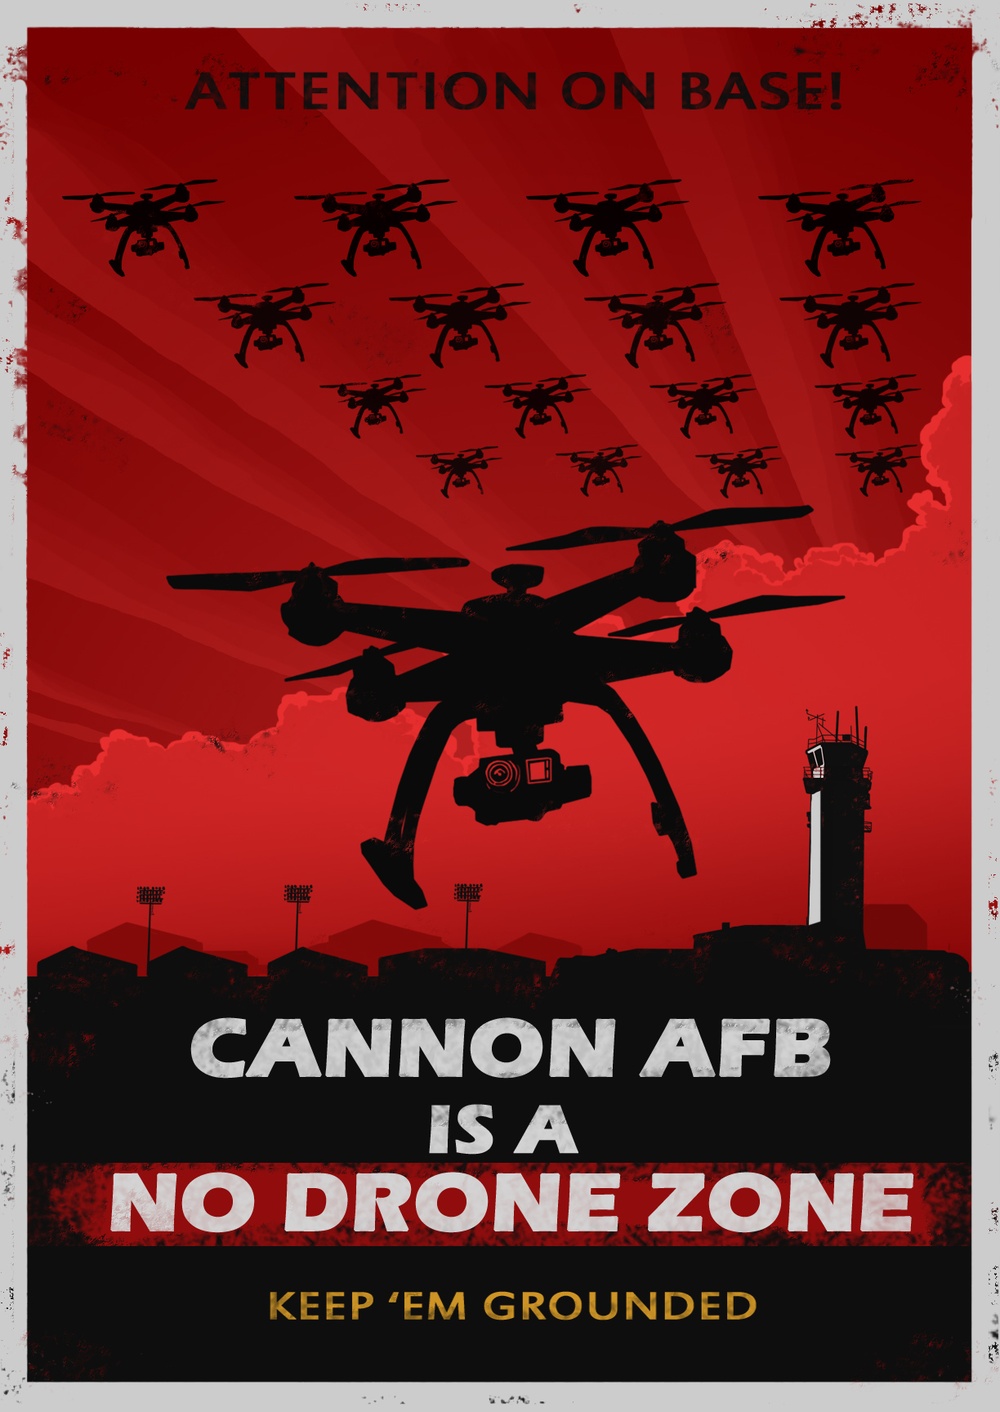 Cannon AFB Drone Use Policy